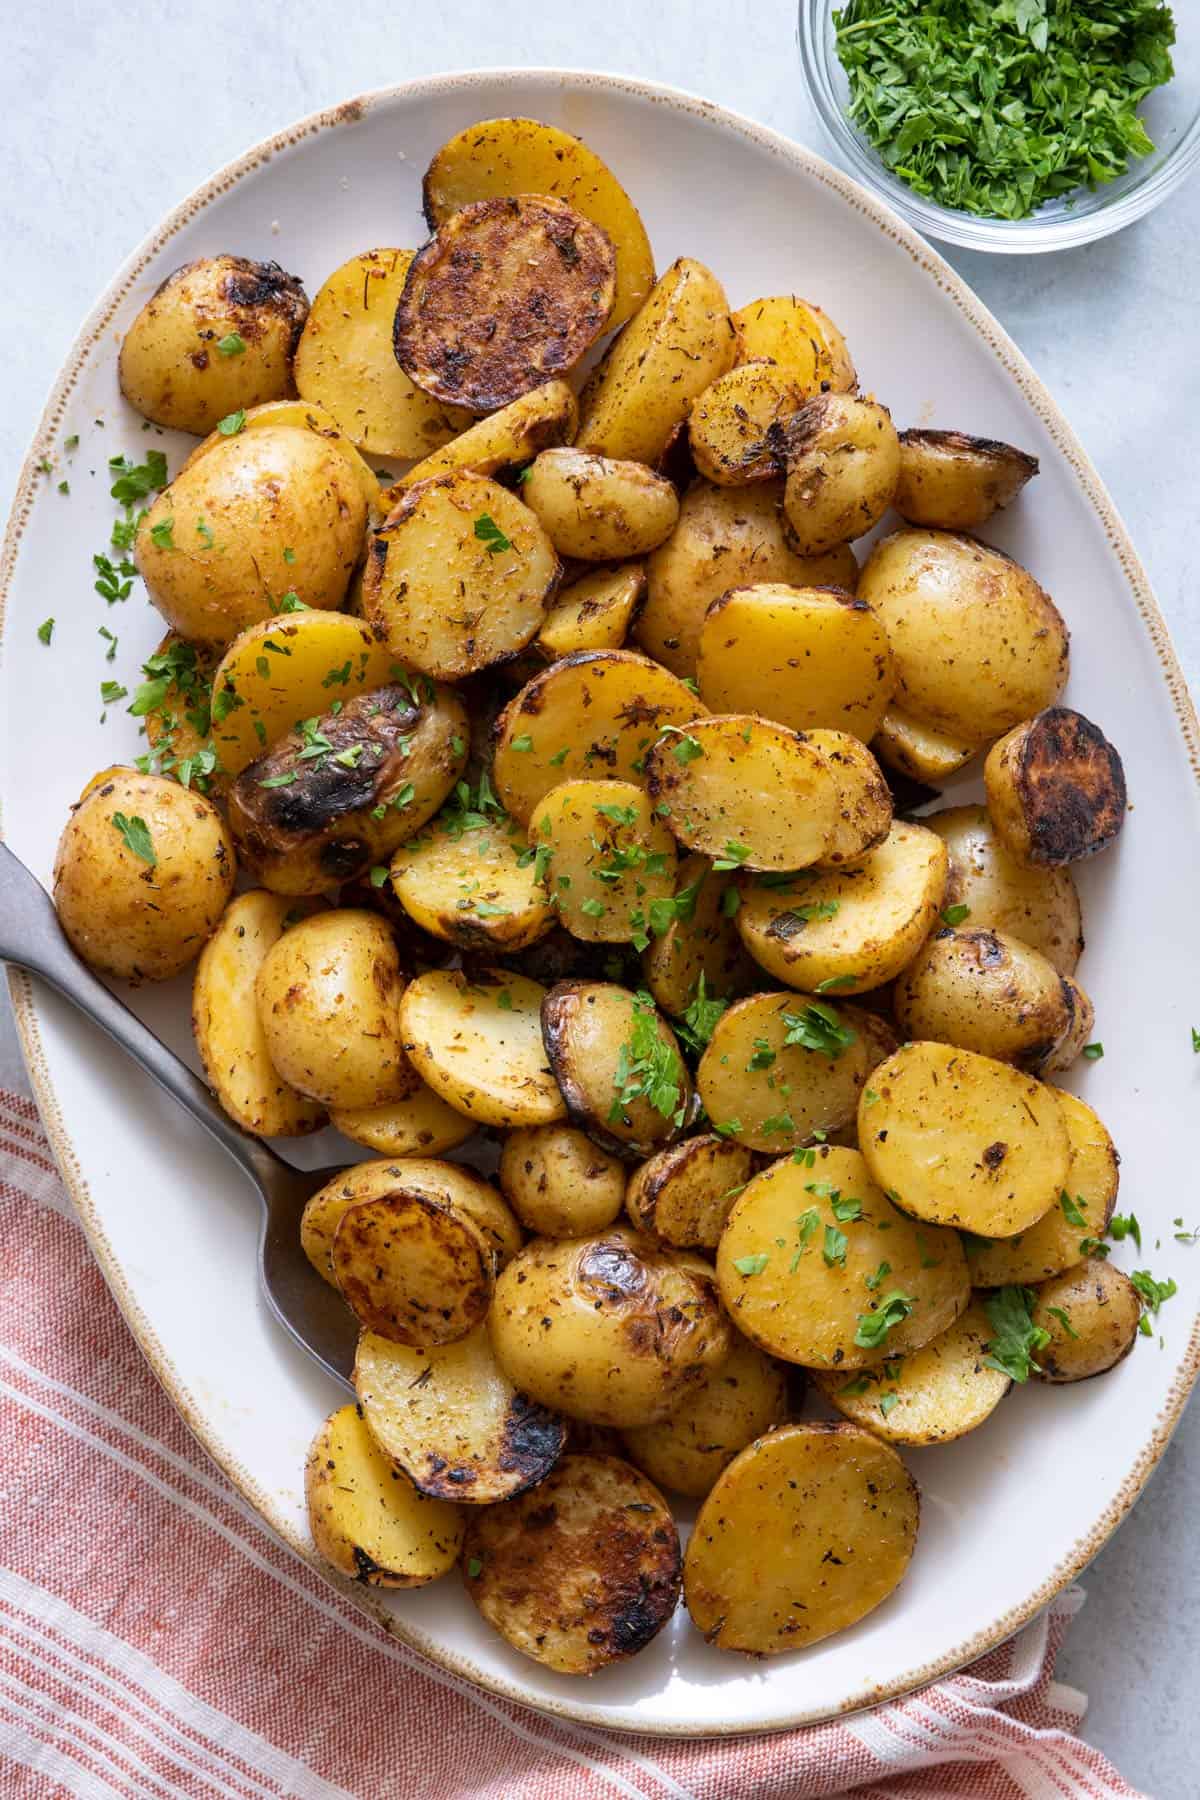 Platter with grilled potatoes garnished with parsley and spoon on side.